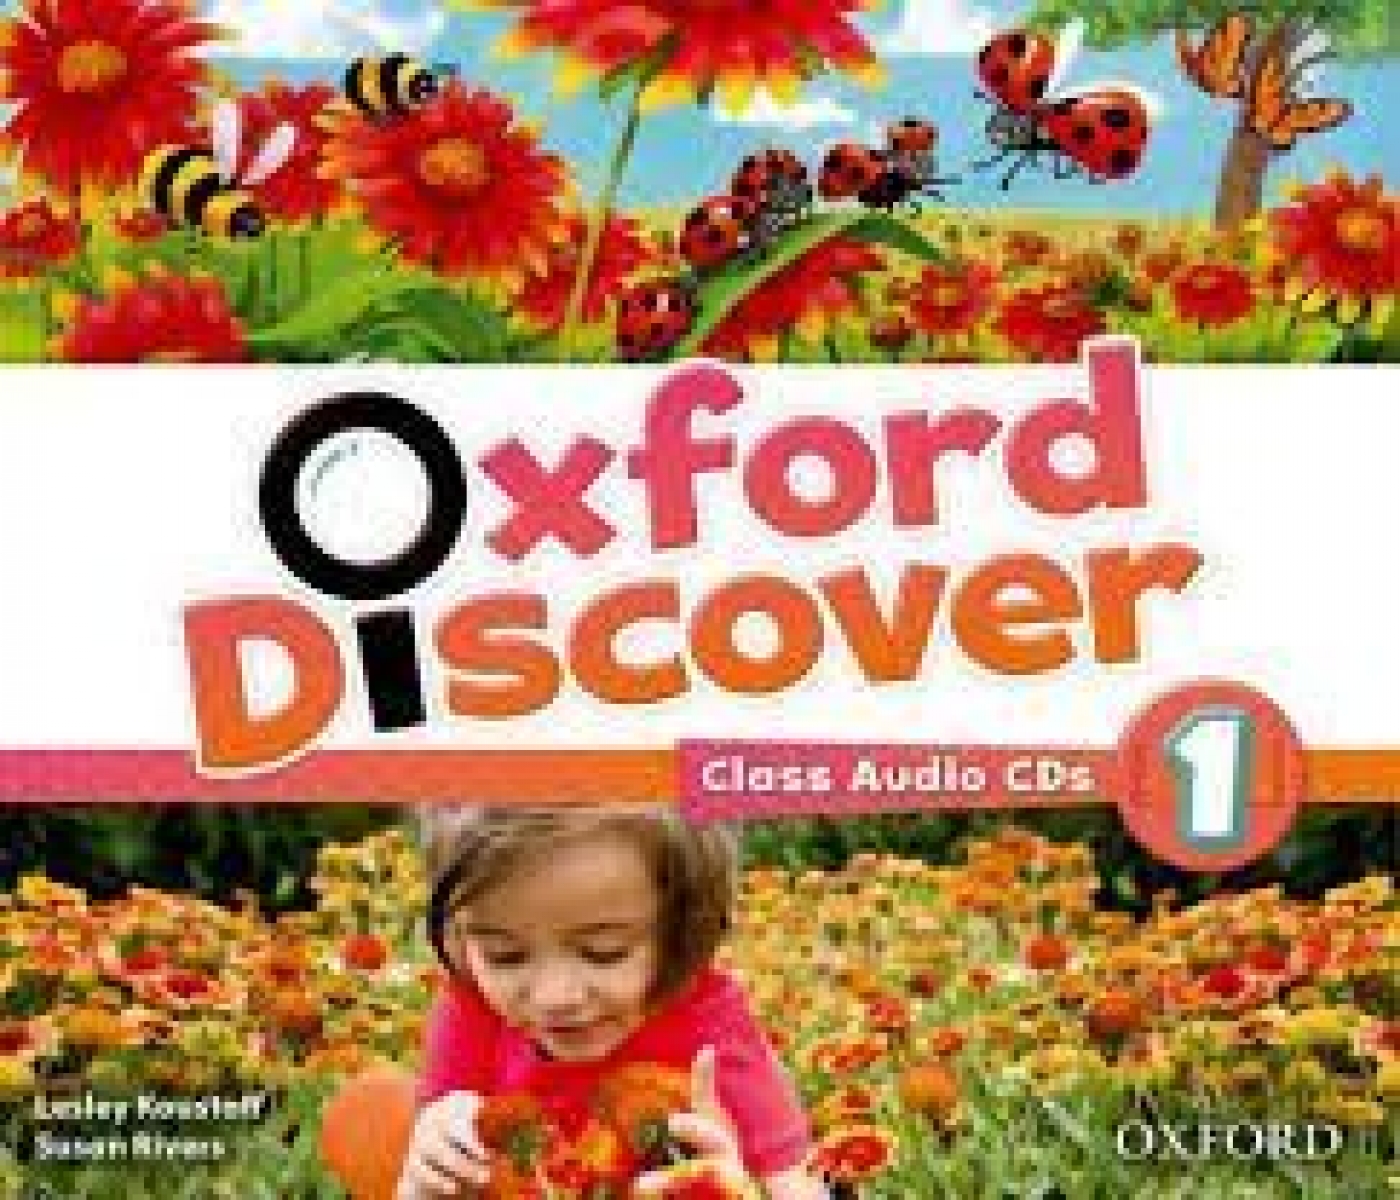 Oxford Discover